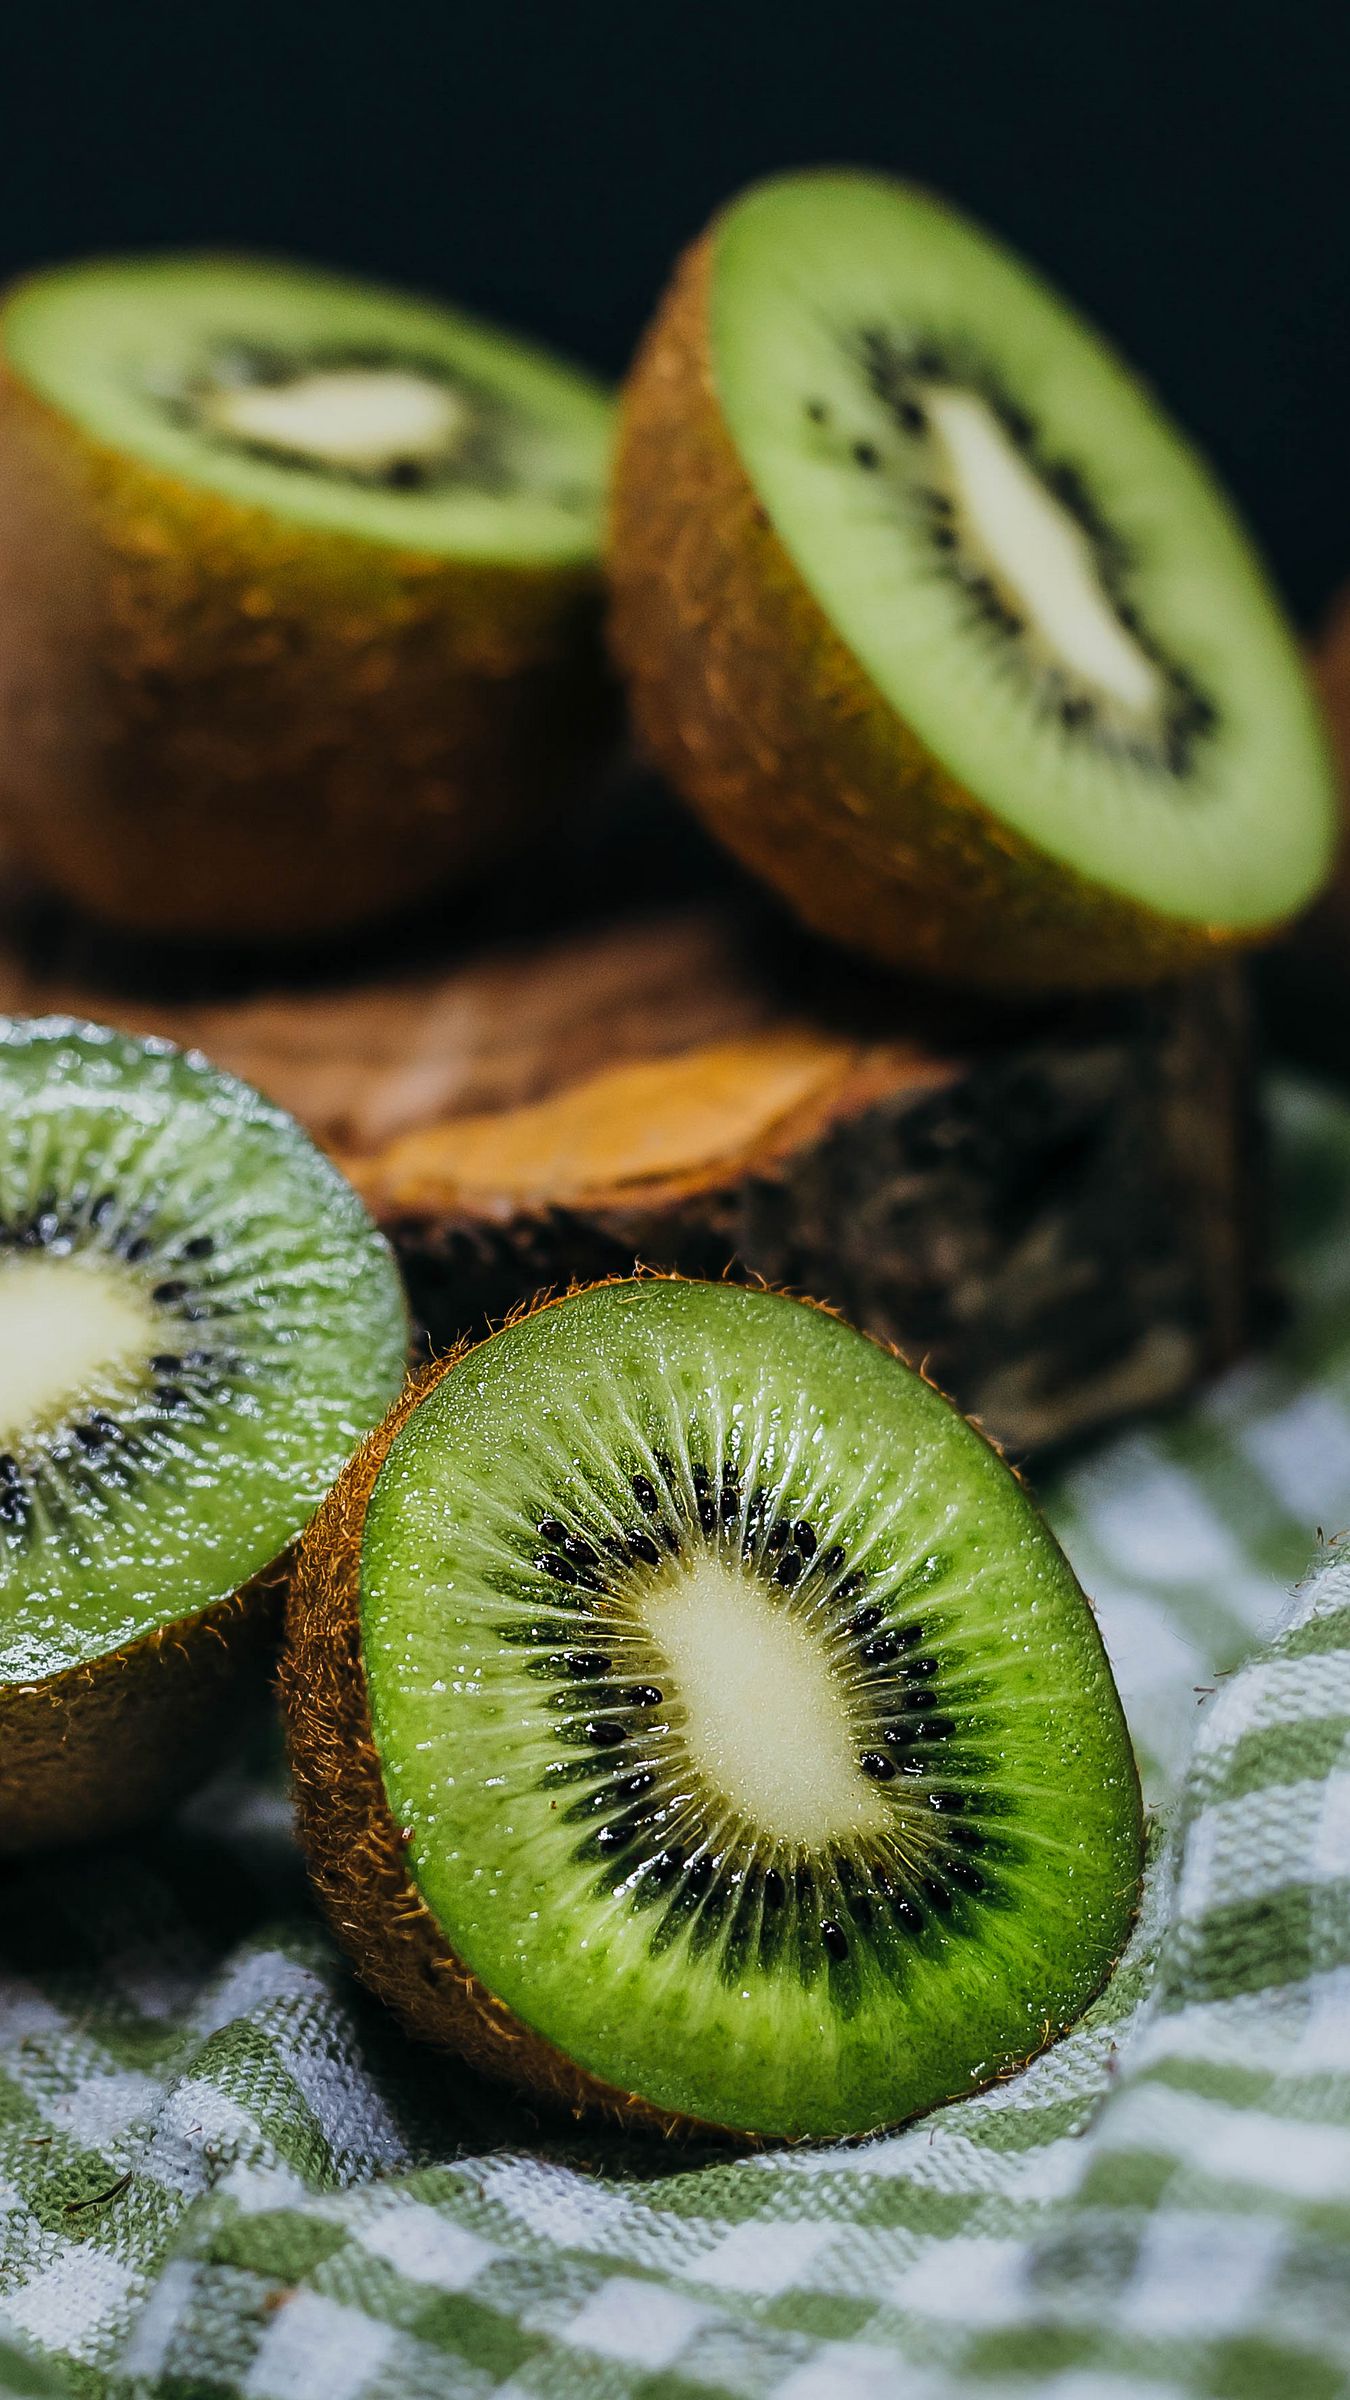 Download wallpaper x kiwi fruit ripe juicy green iphone s for parallax hd background